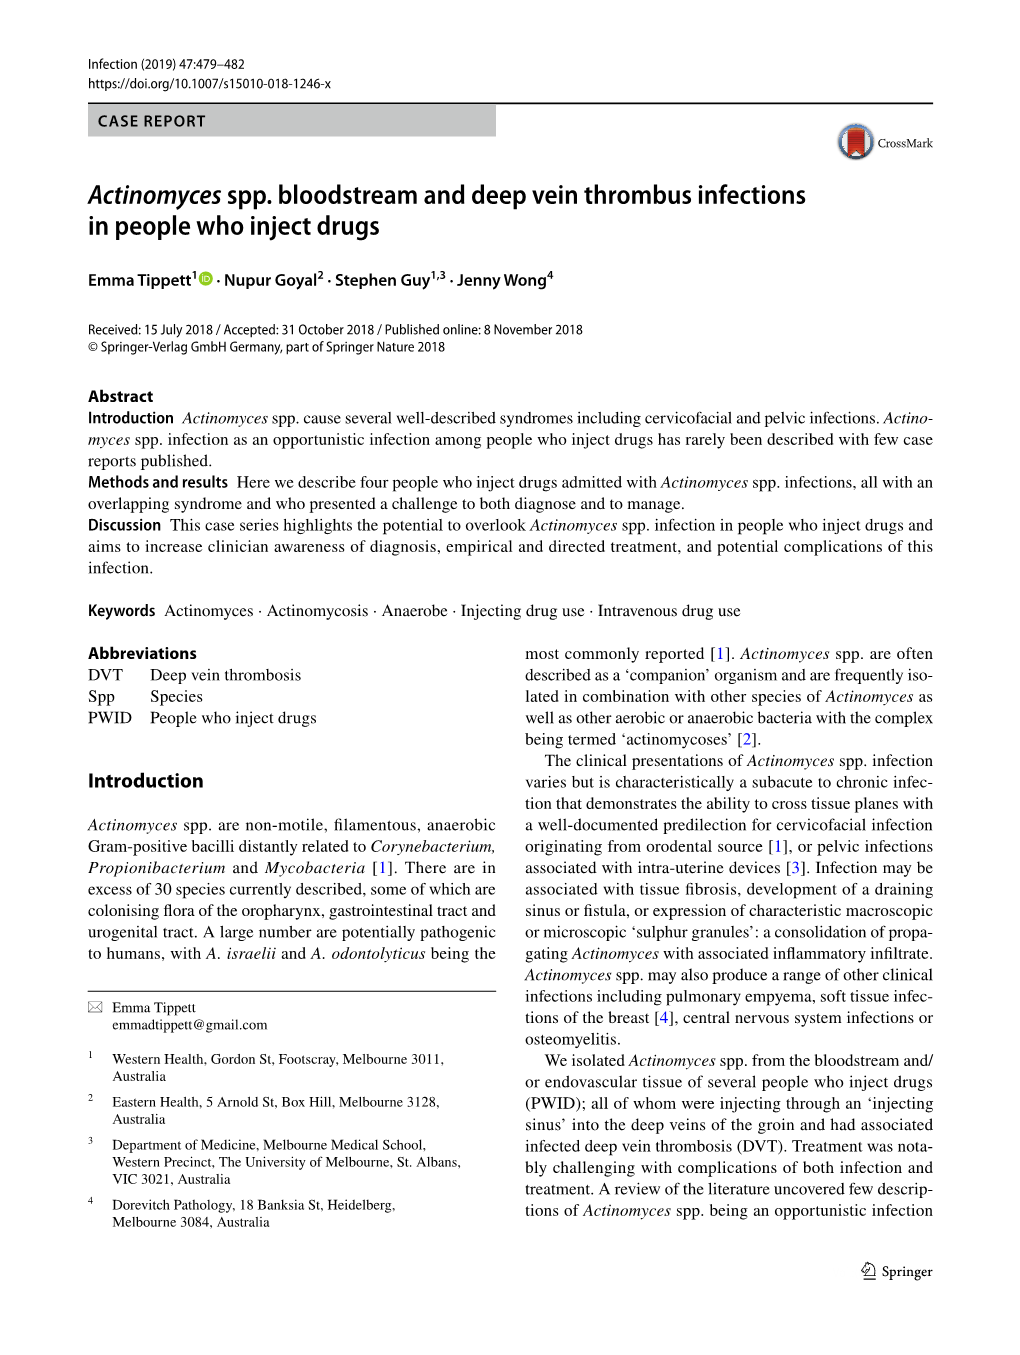 Actinomyces Spp. Bloodstream and Deep Vein Thrombus Infections in People Who Inject Drugs